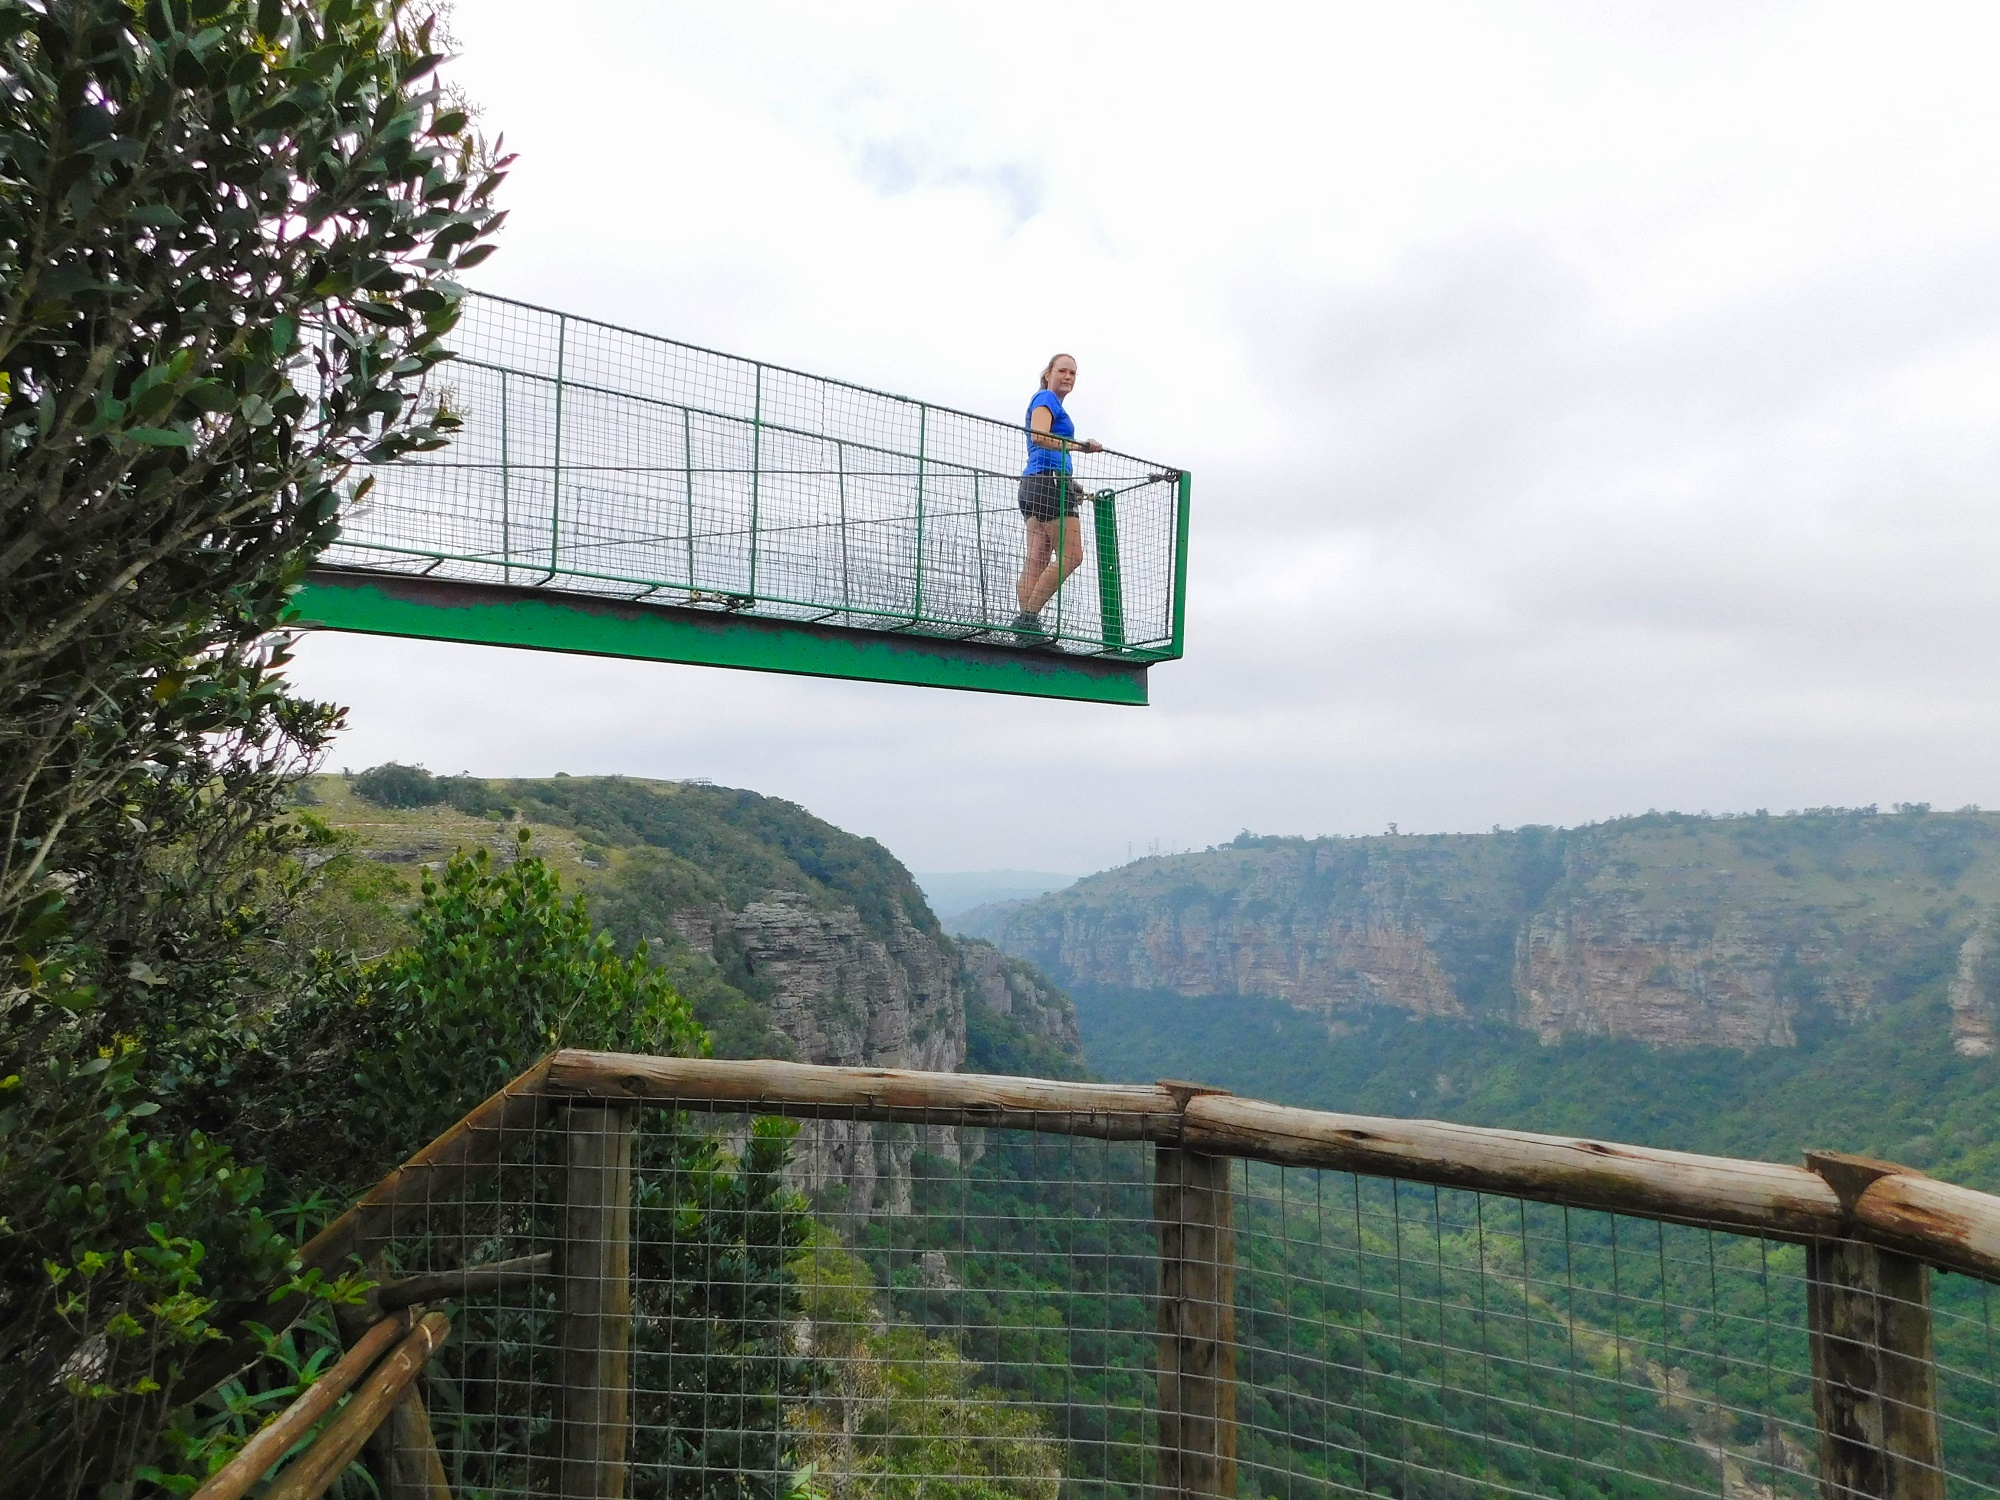 Lookout point over the Oribi Gorge at the suspension bridge - Lake Eland Nature Reserve